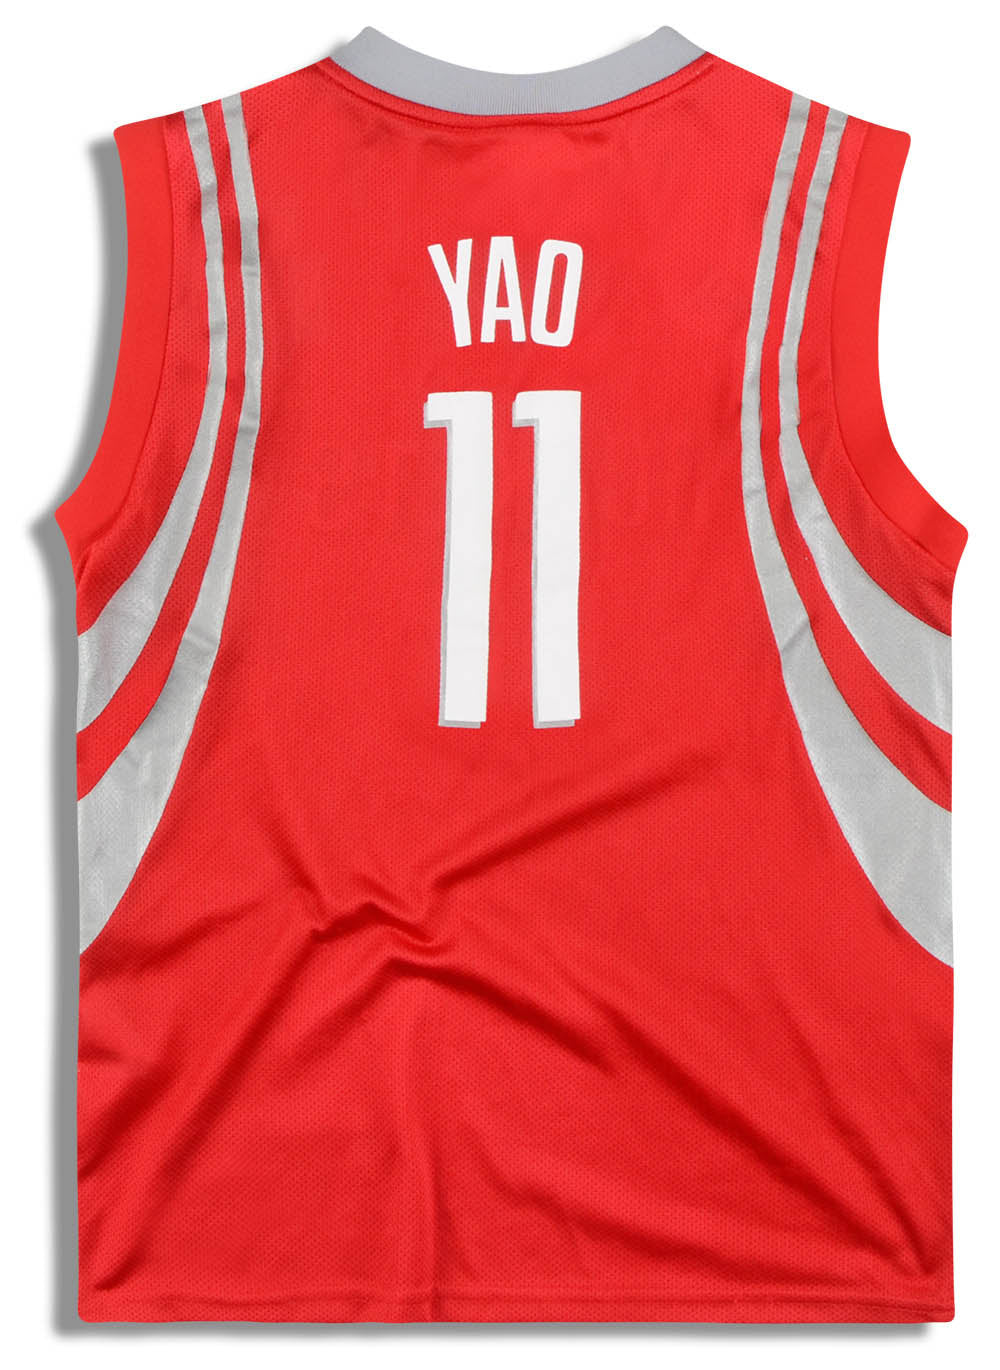 2007 AUTHENTIC NBA ALL-STAR GAME YAO #11 ADIDAS JERSEY M - Classic